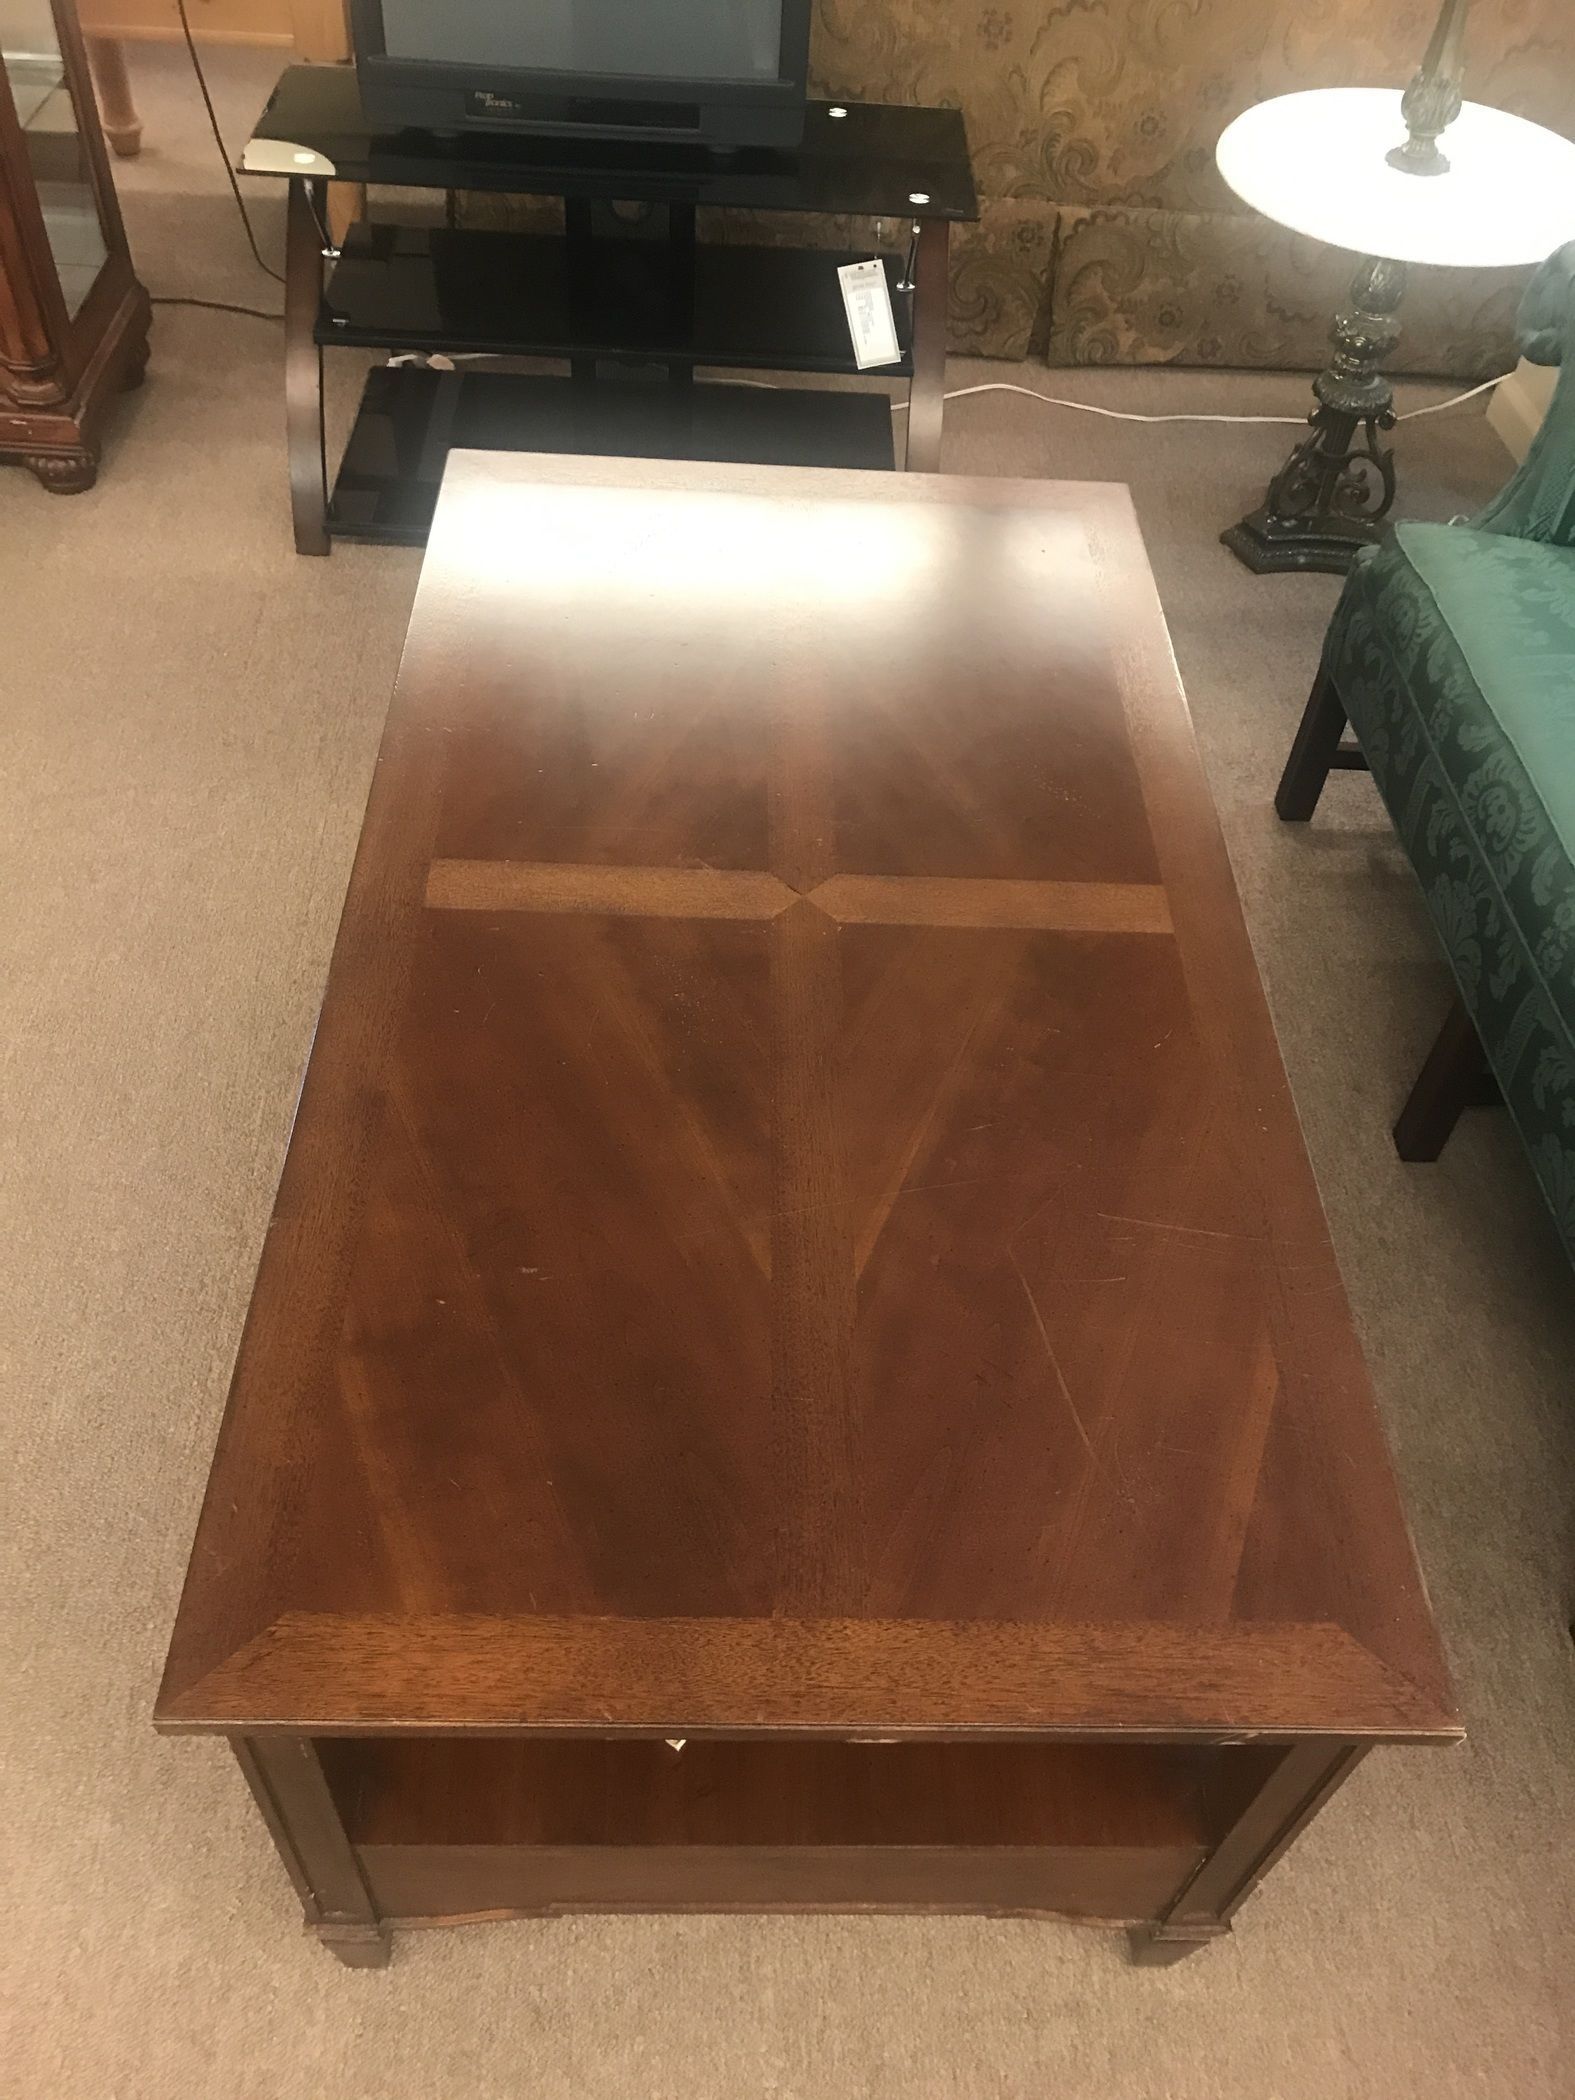 Stanley 2 Drawer Coffee Table | Delmarva Furniture Consignment With Regard To 2 Drawer Oval Coffee Tables (View 4 of 15)